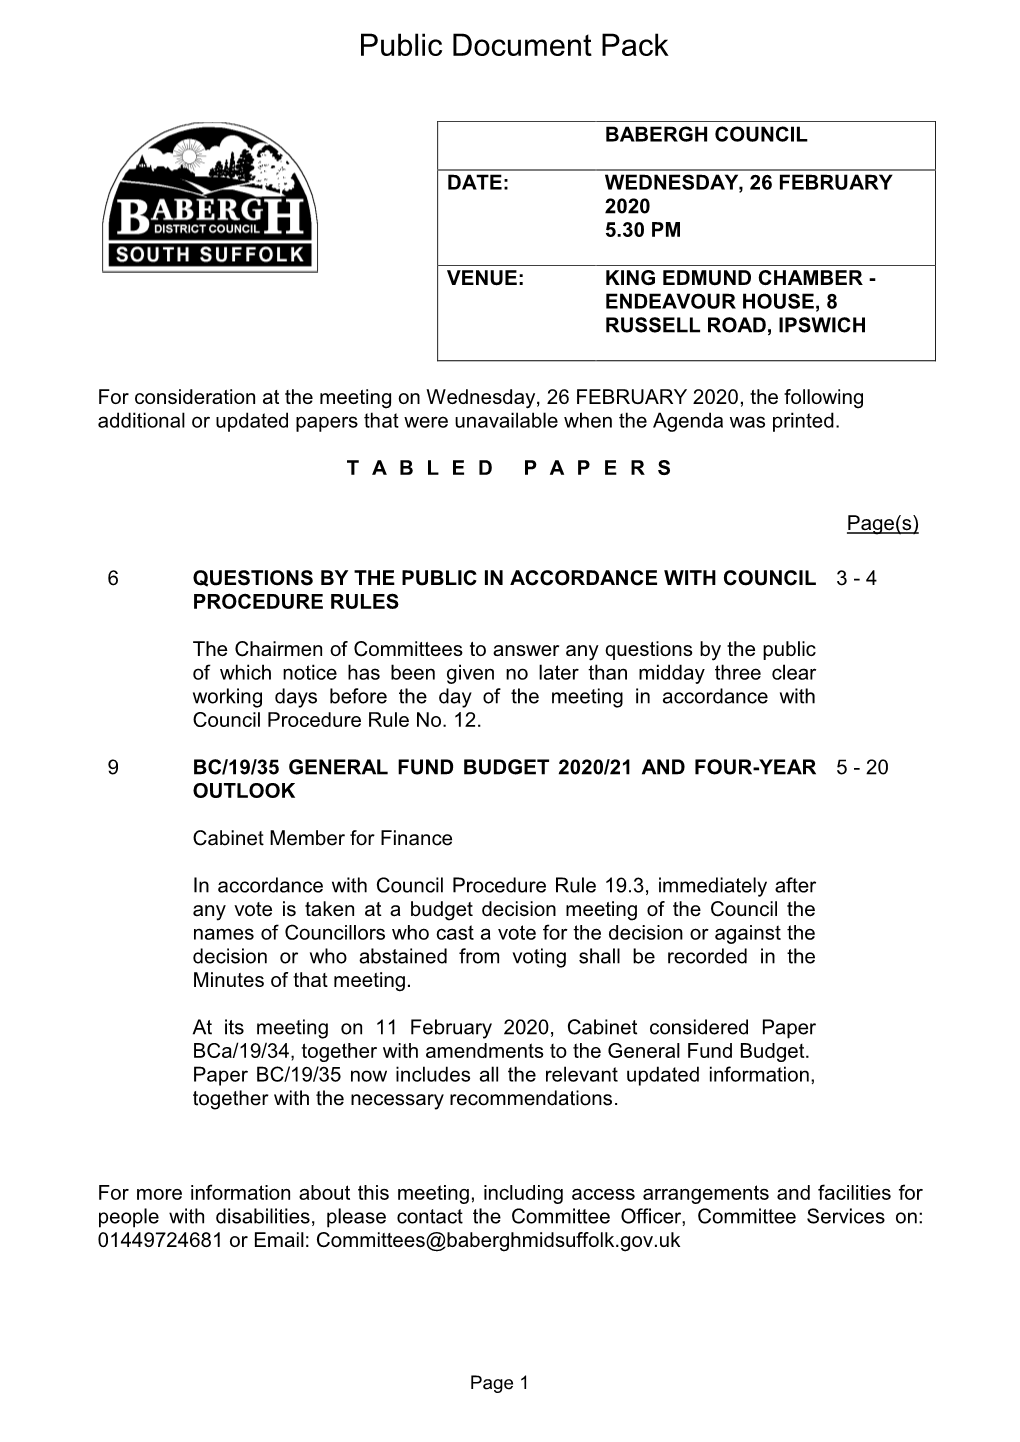 Tabled Papers Agenda Supplement for Babergh Council, 26/02/2020 17